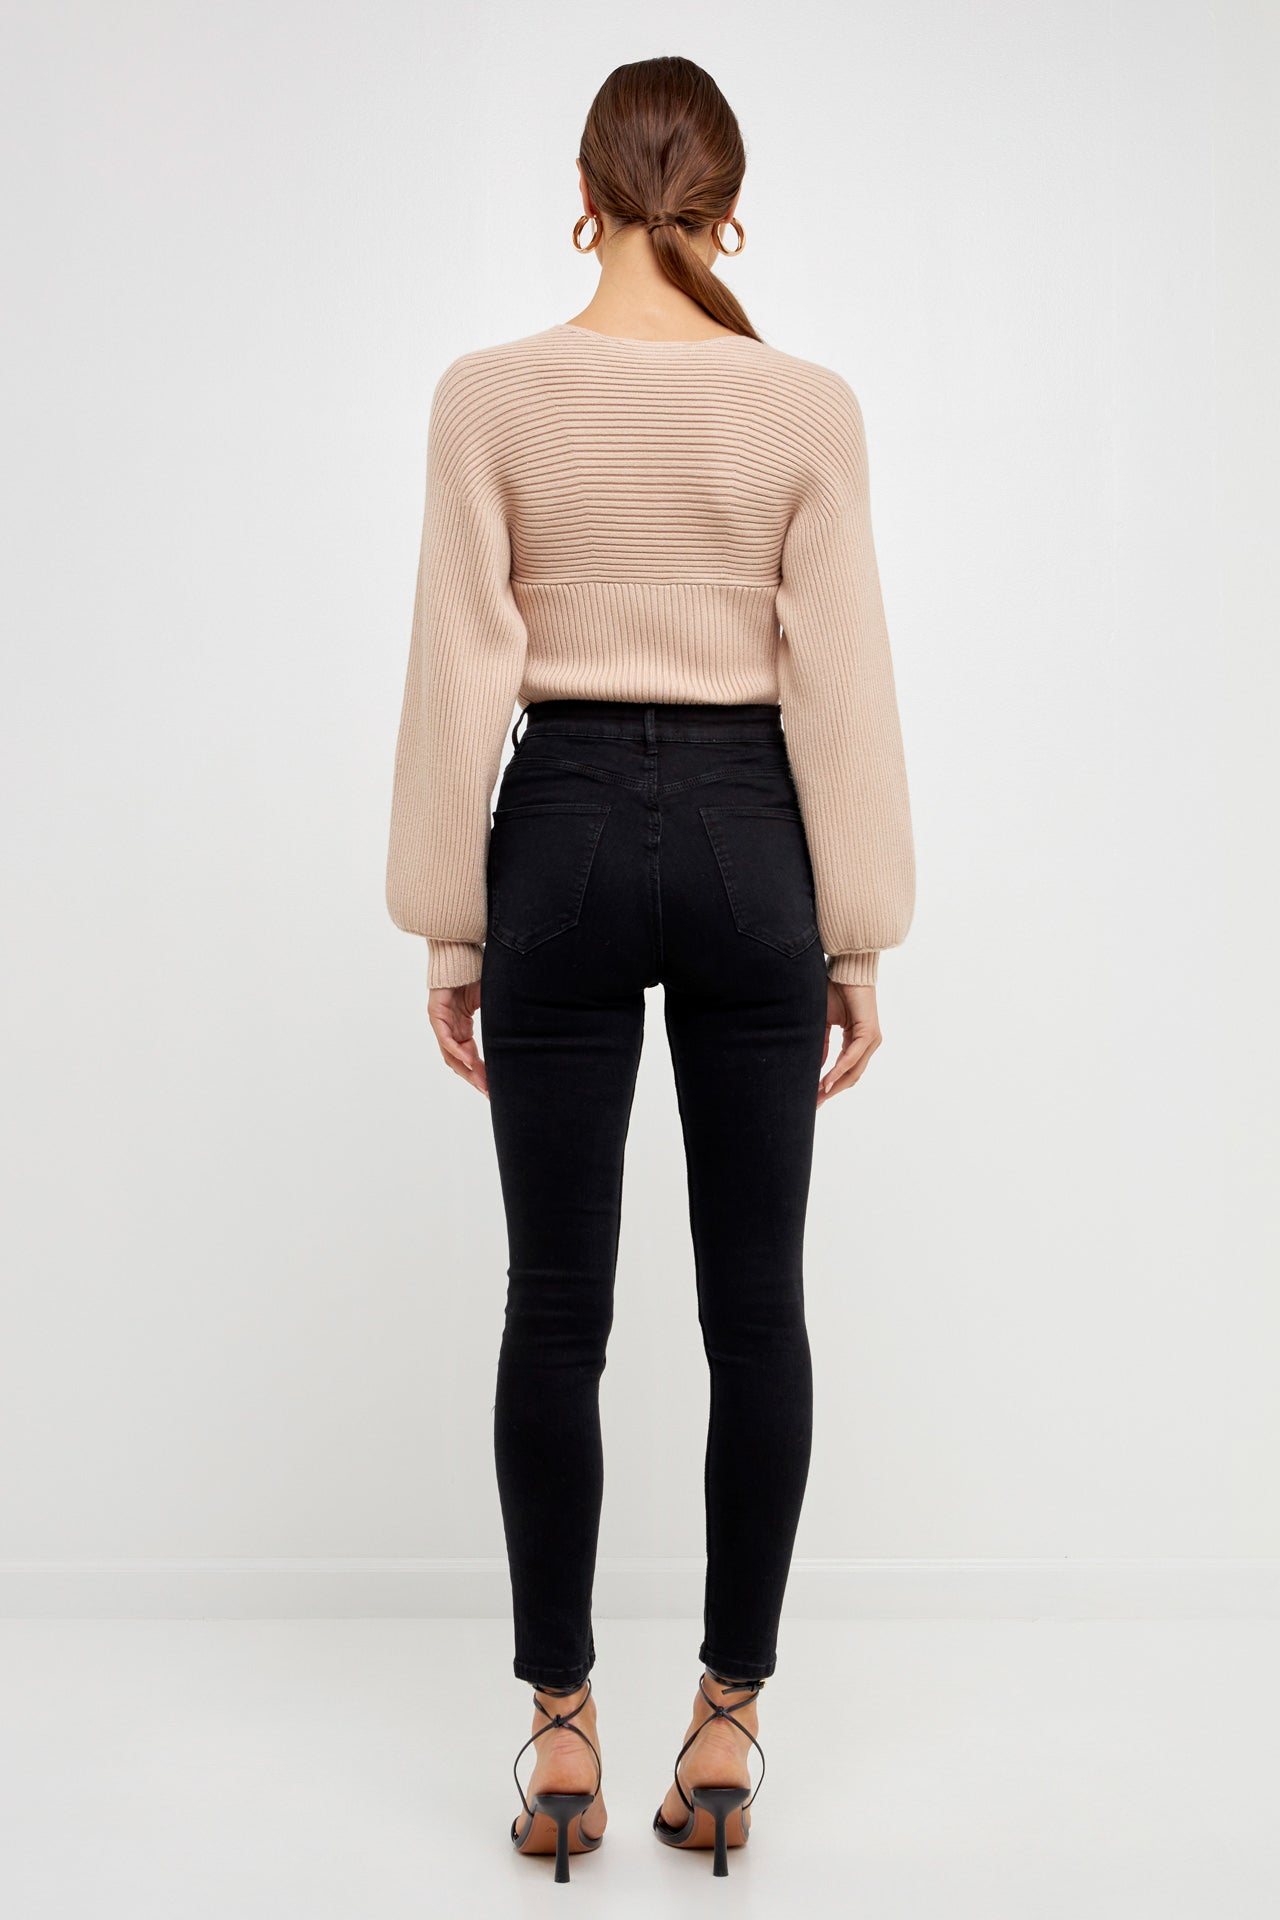 Knitted top in beige featuring square neckline, ribbed detailing, balloon sleeves.  Back full view.